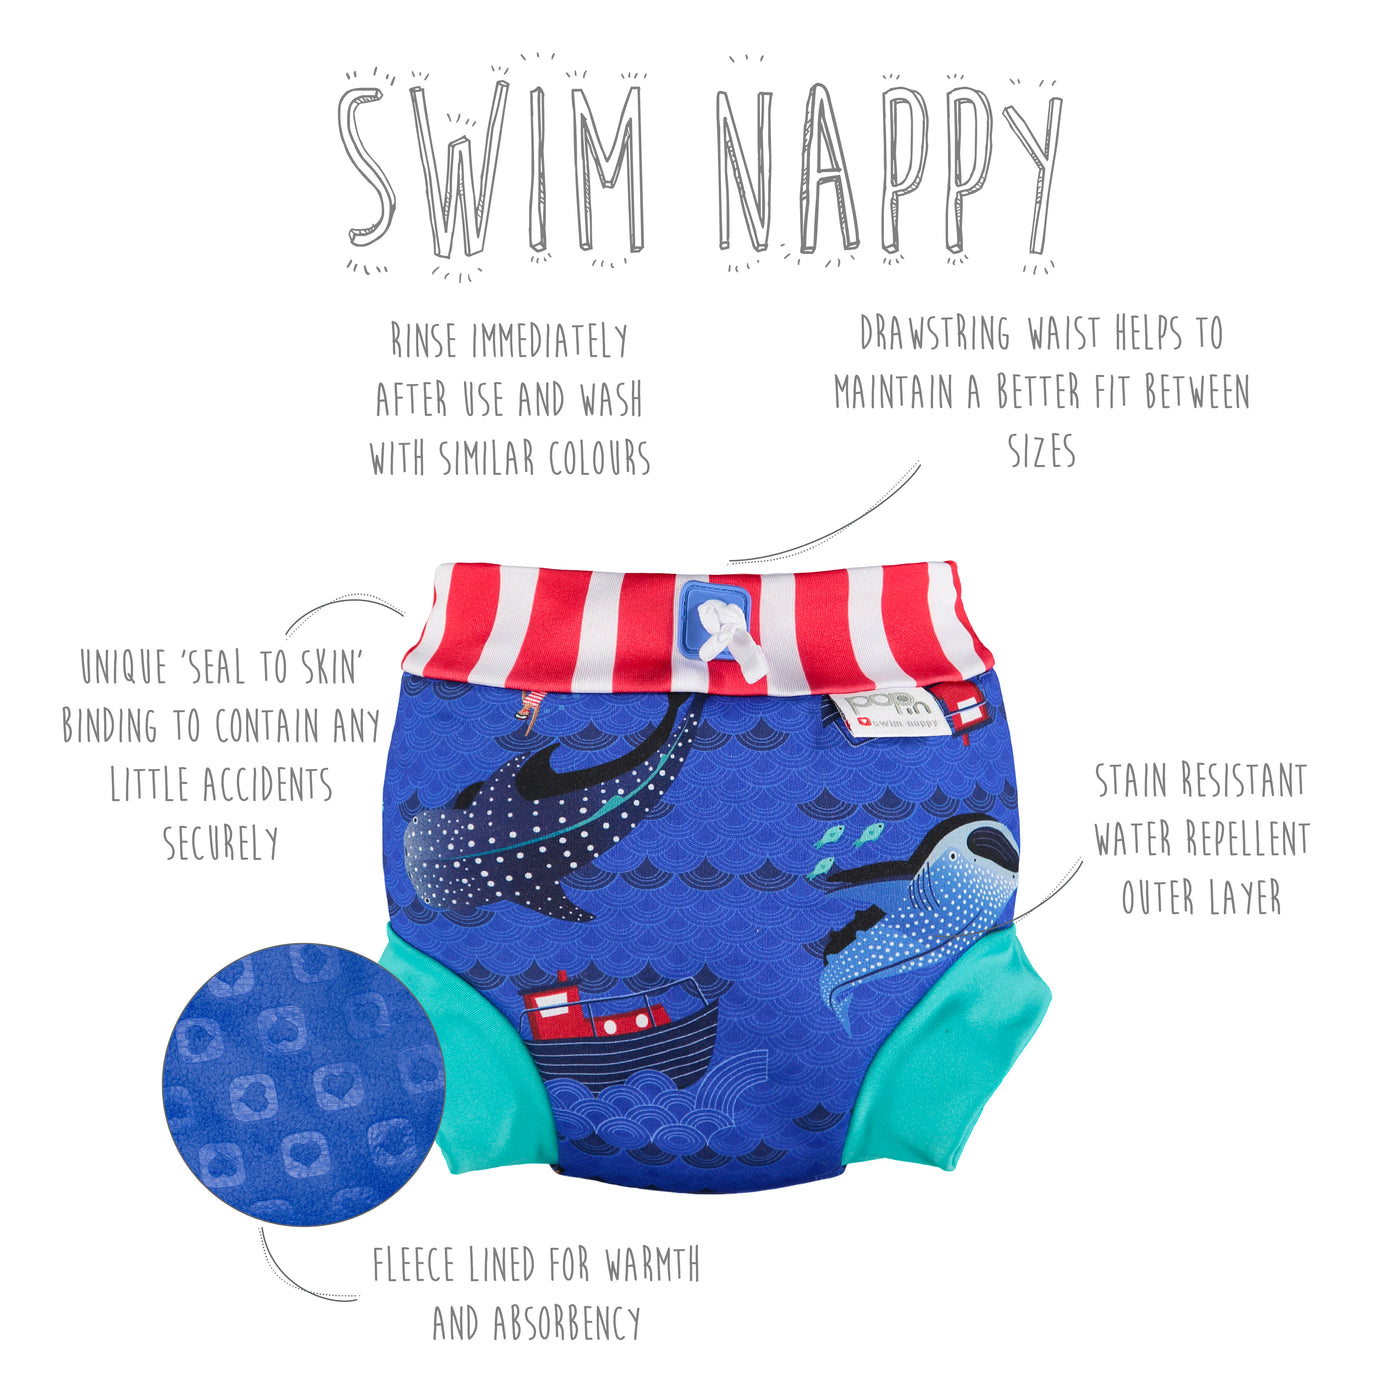 Close Pop-in Reusable Swim Nappy Lined with Leak-protection 0-4 years+ unisex prints